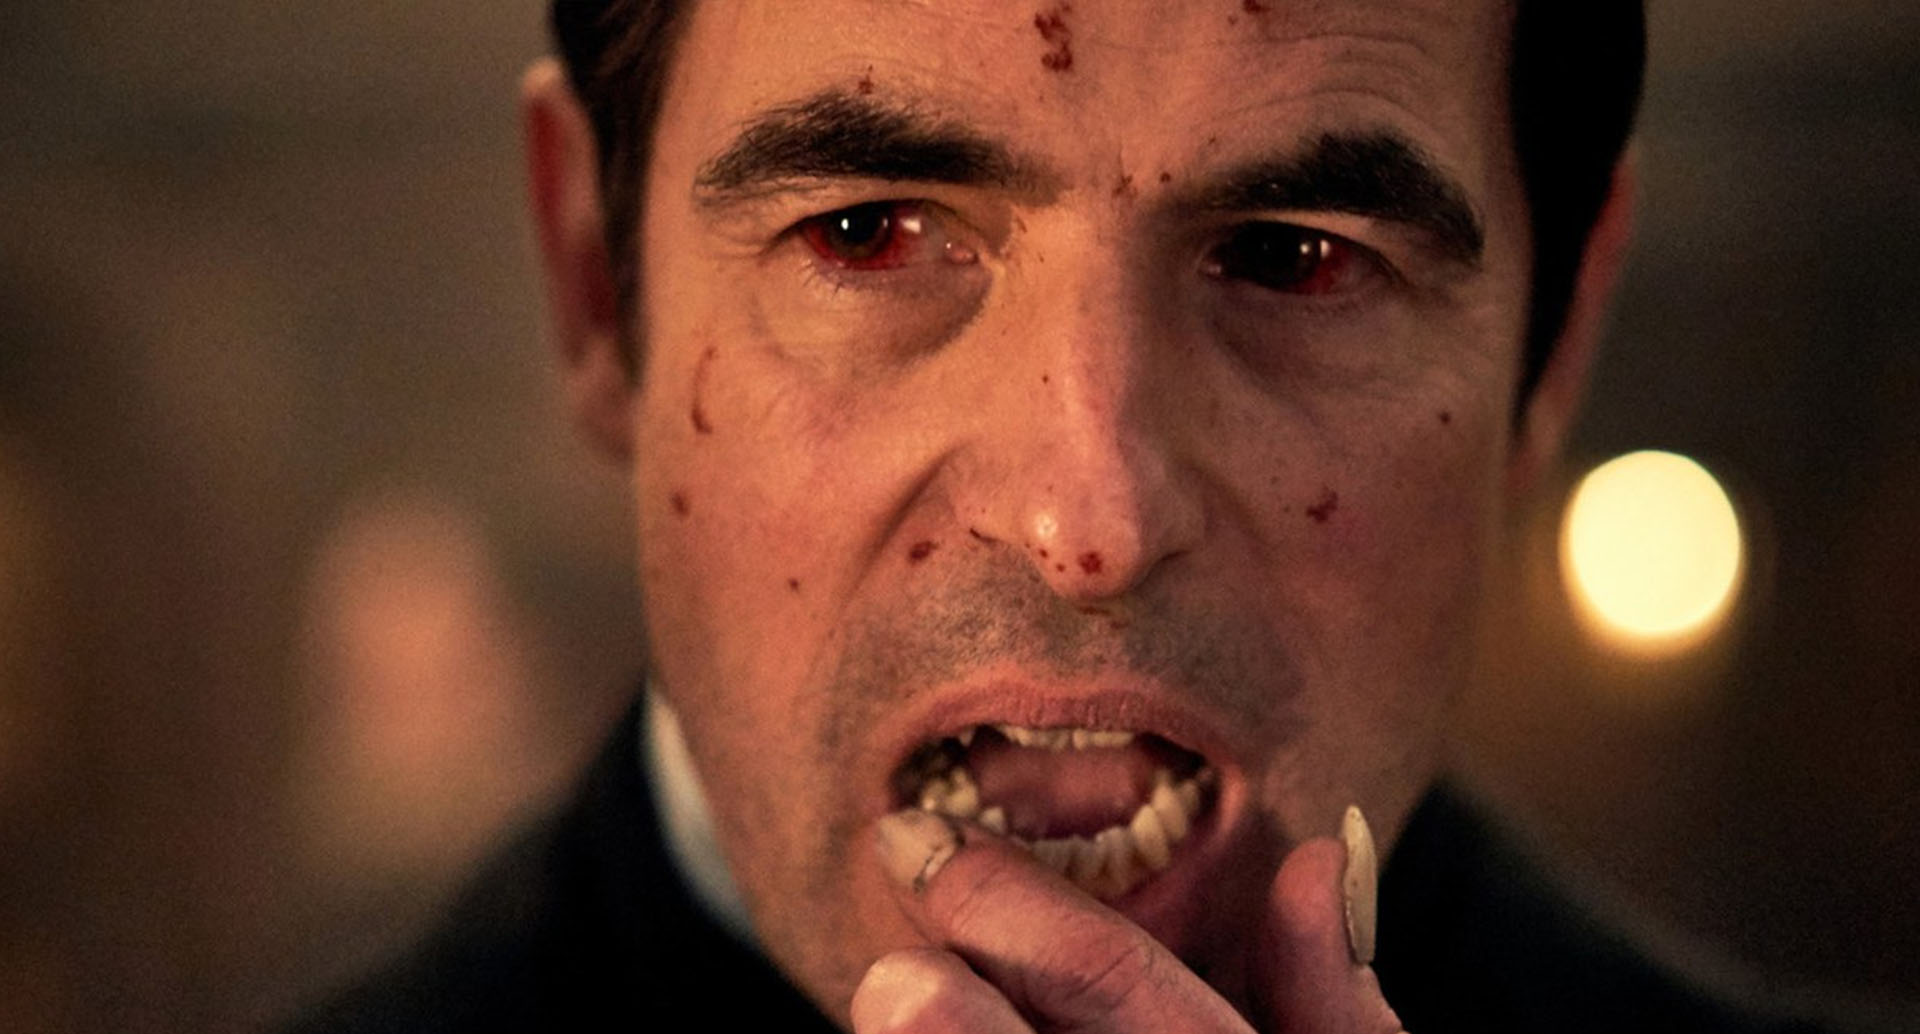  Watch The First trailer for BBC and Netflix’s Dracula series